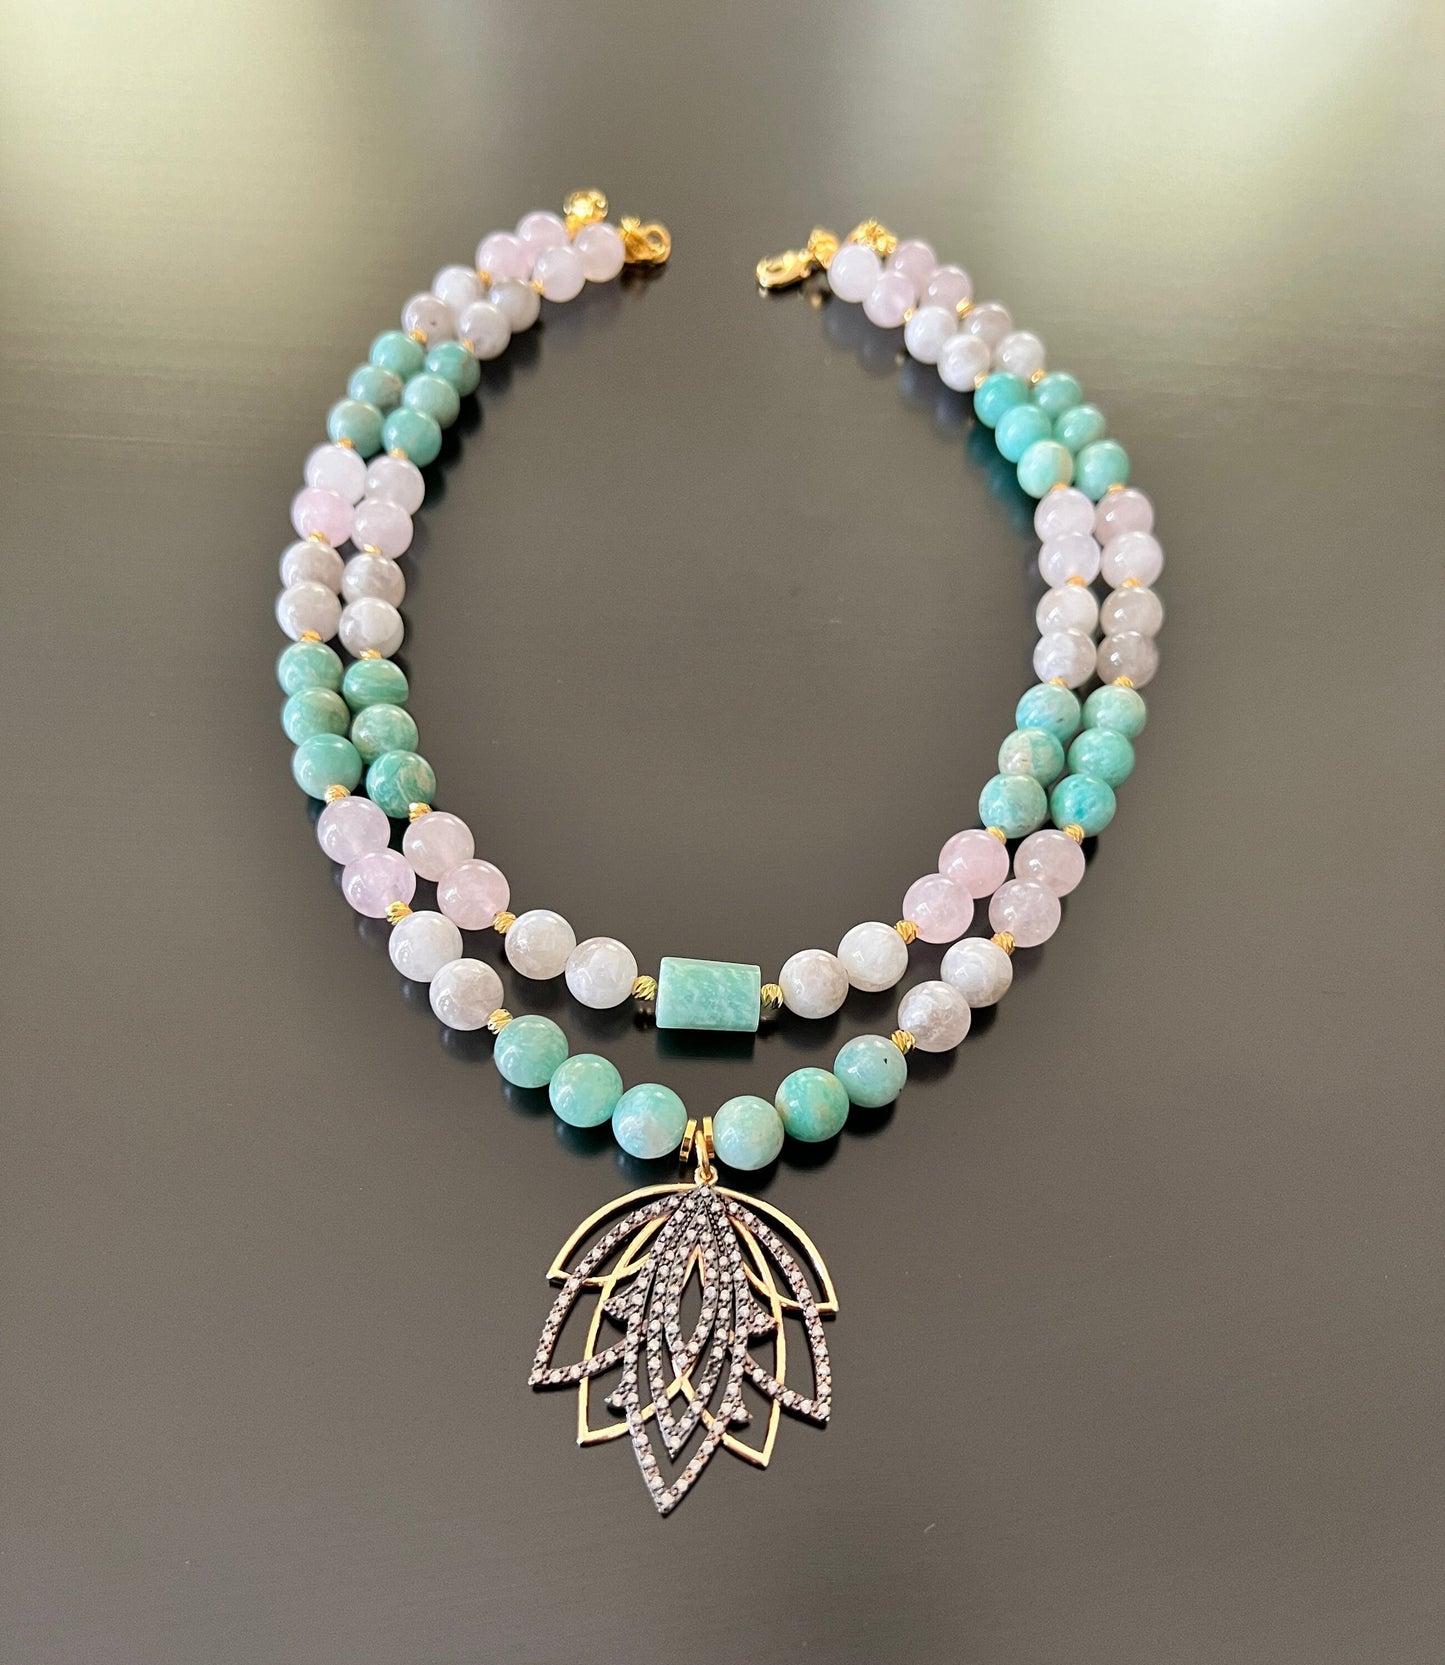 Mix Crystal Necklace, Beaded Moon Stone,Rose Quartz,Amazonite Necklace, Lotus Pendant Jewelry, Statement Necklace for Women, Gifts